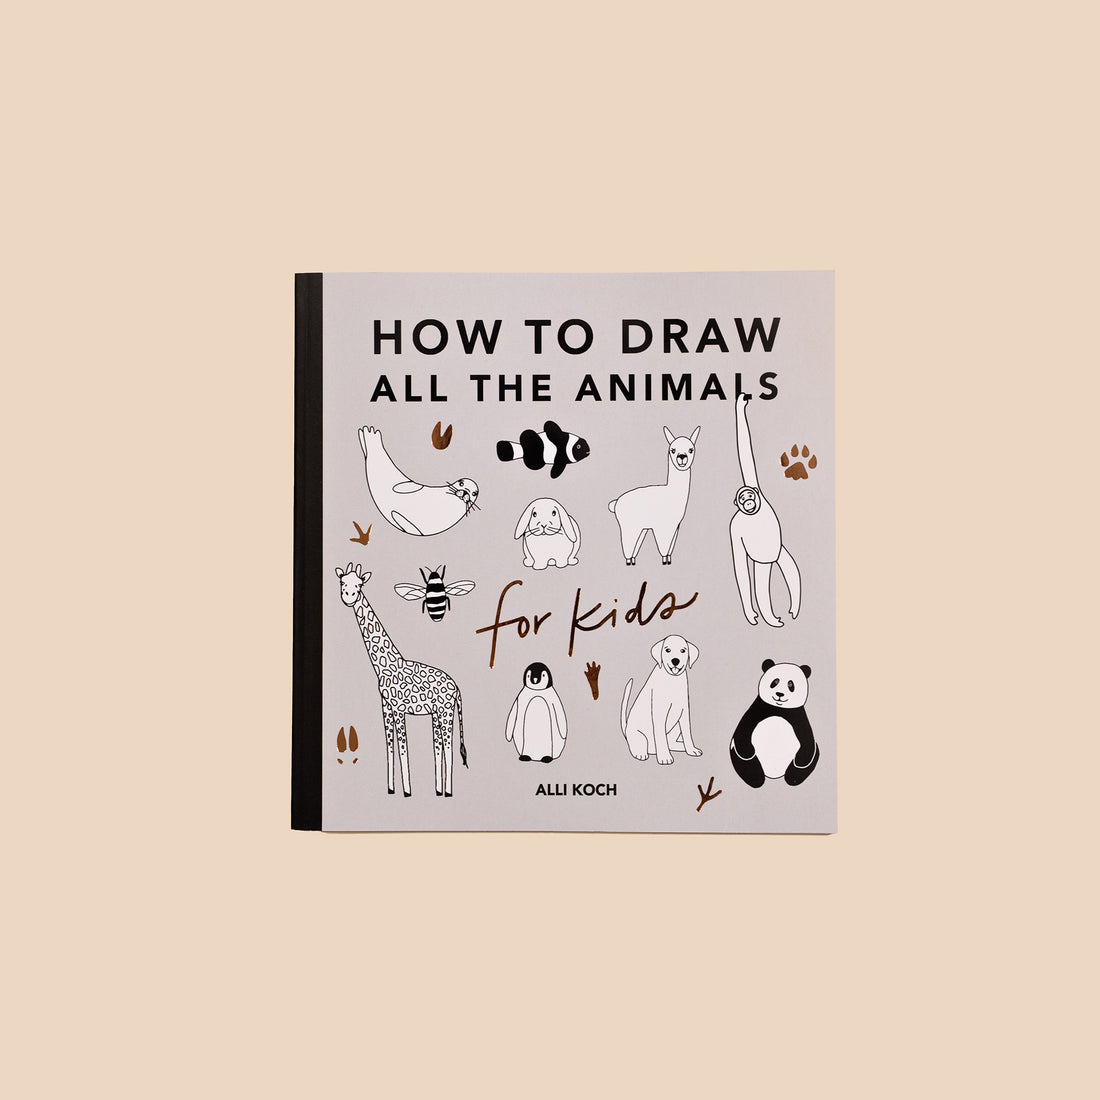 How To Draw All The Animals by Alli Koch